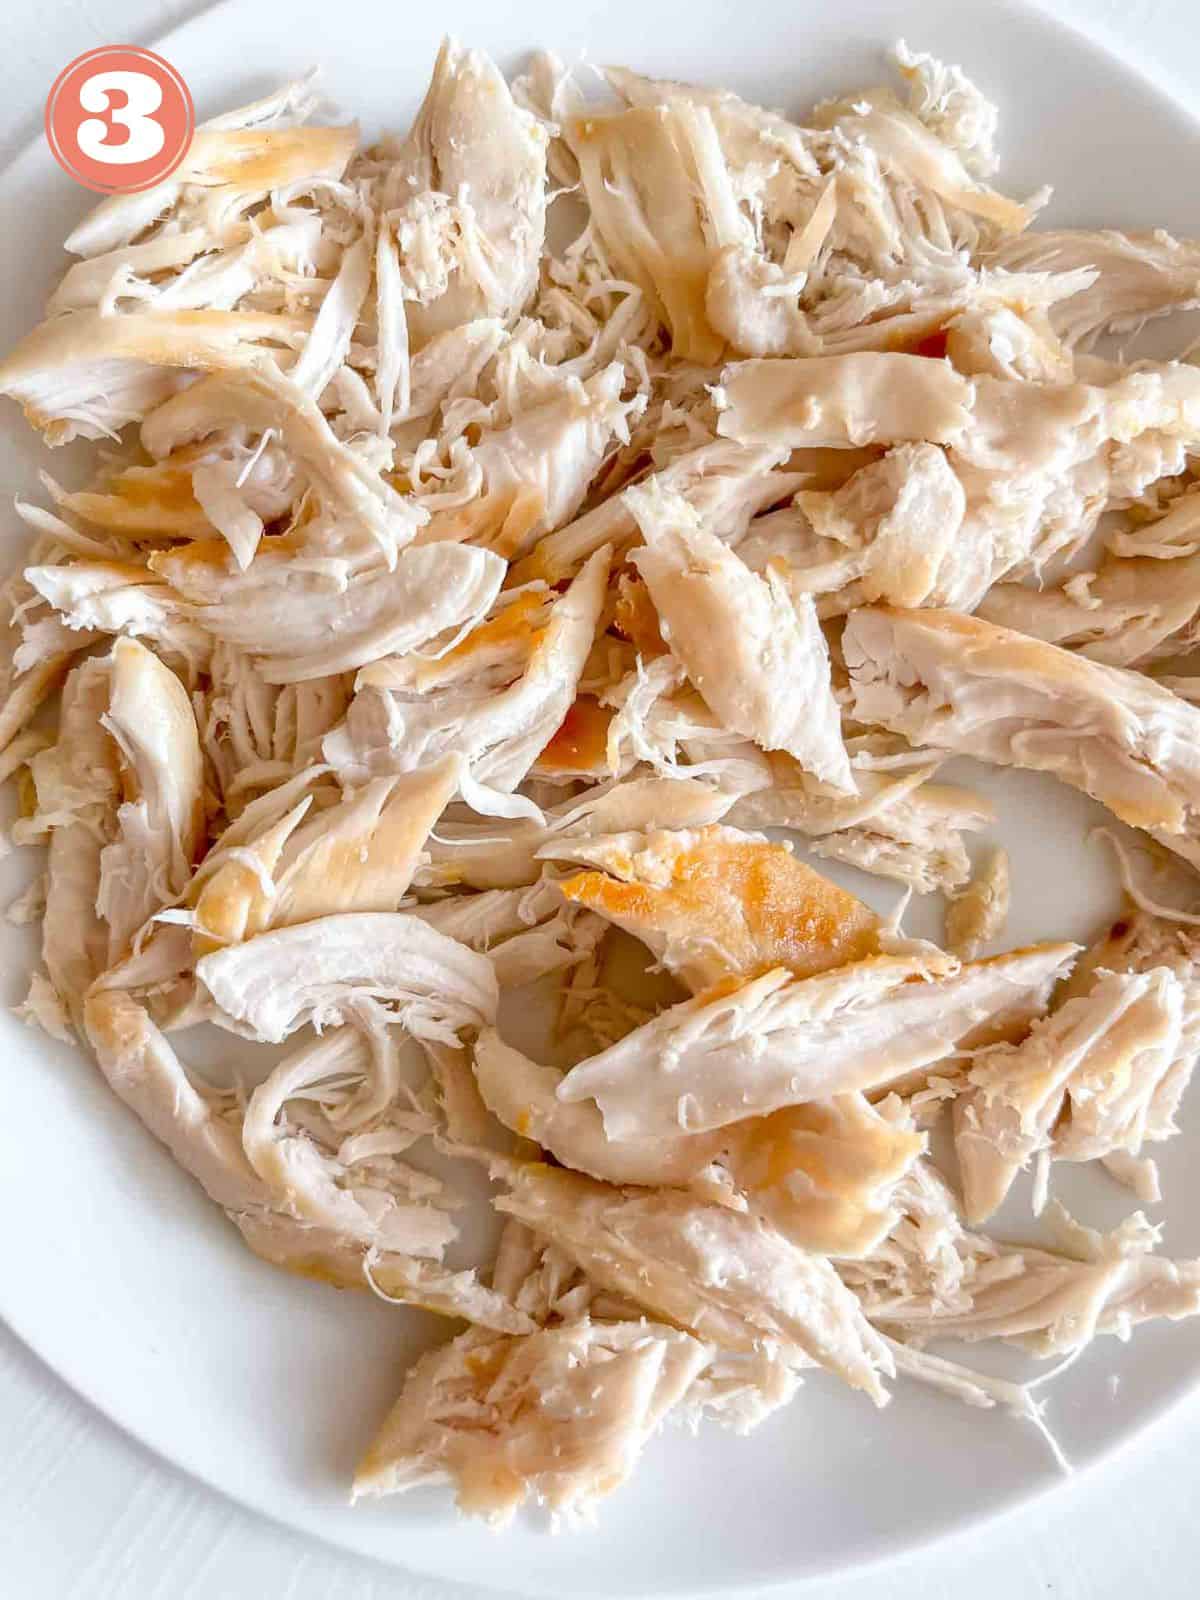 shredded chicken on a white plate labelled number three.